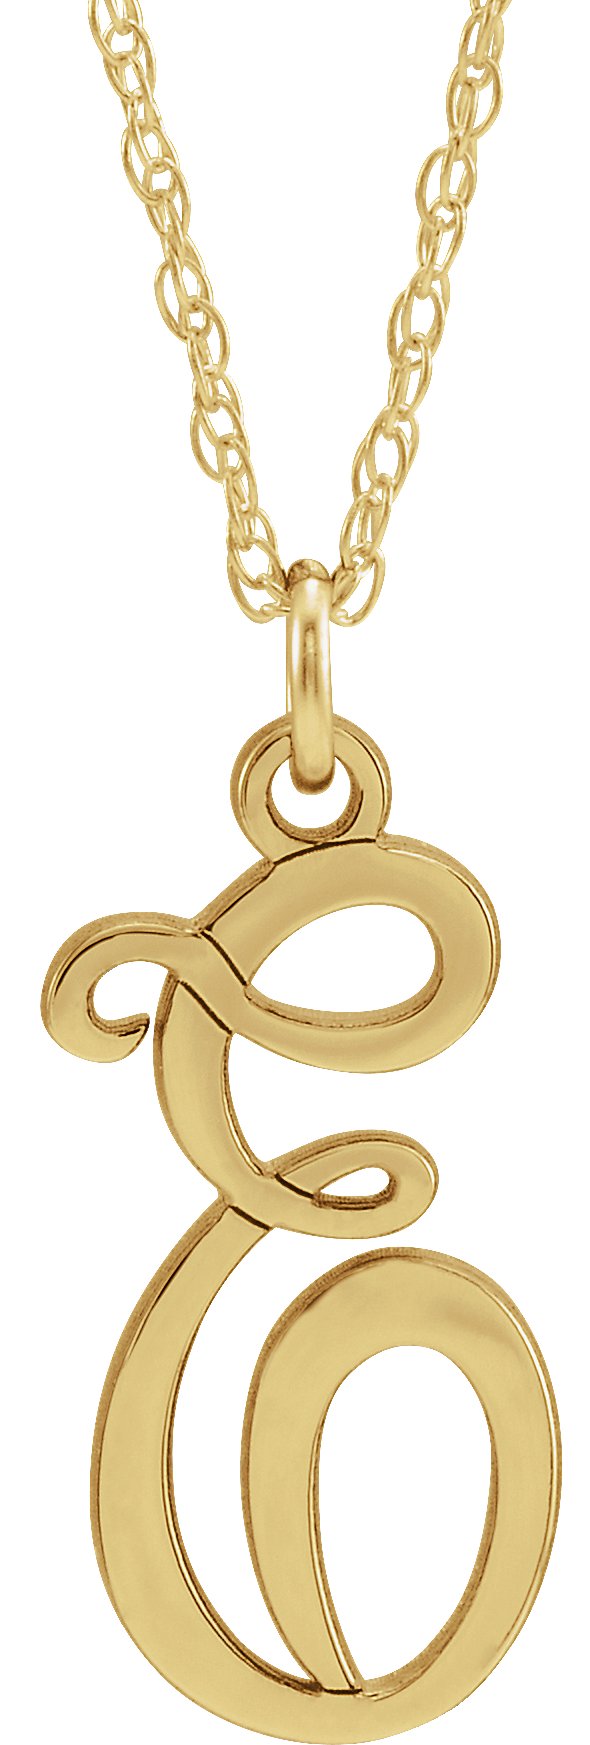 14K Yellow Gold-Plated Sterling Silver Script Initial E 16-18" Necklace